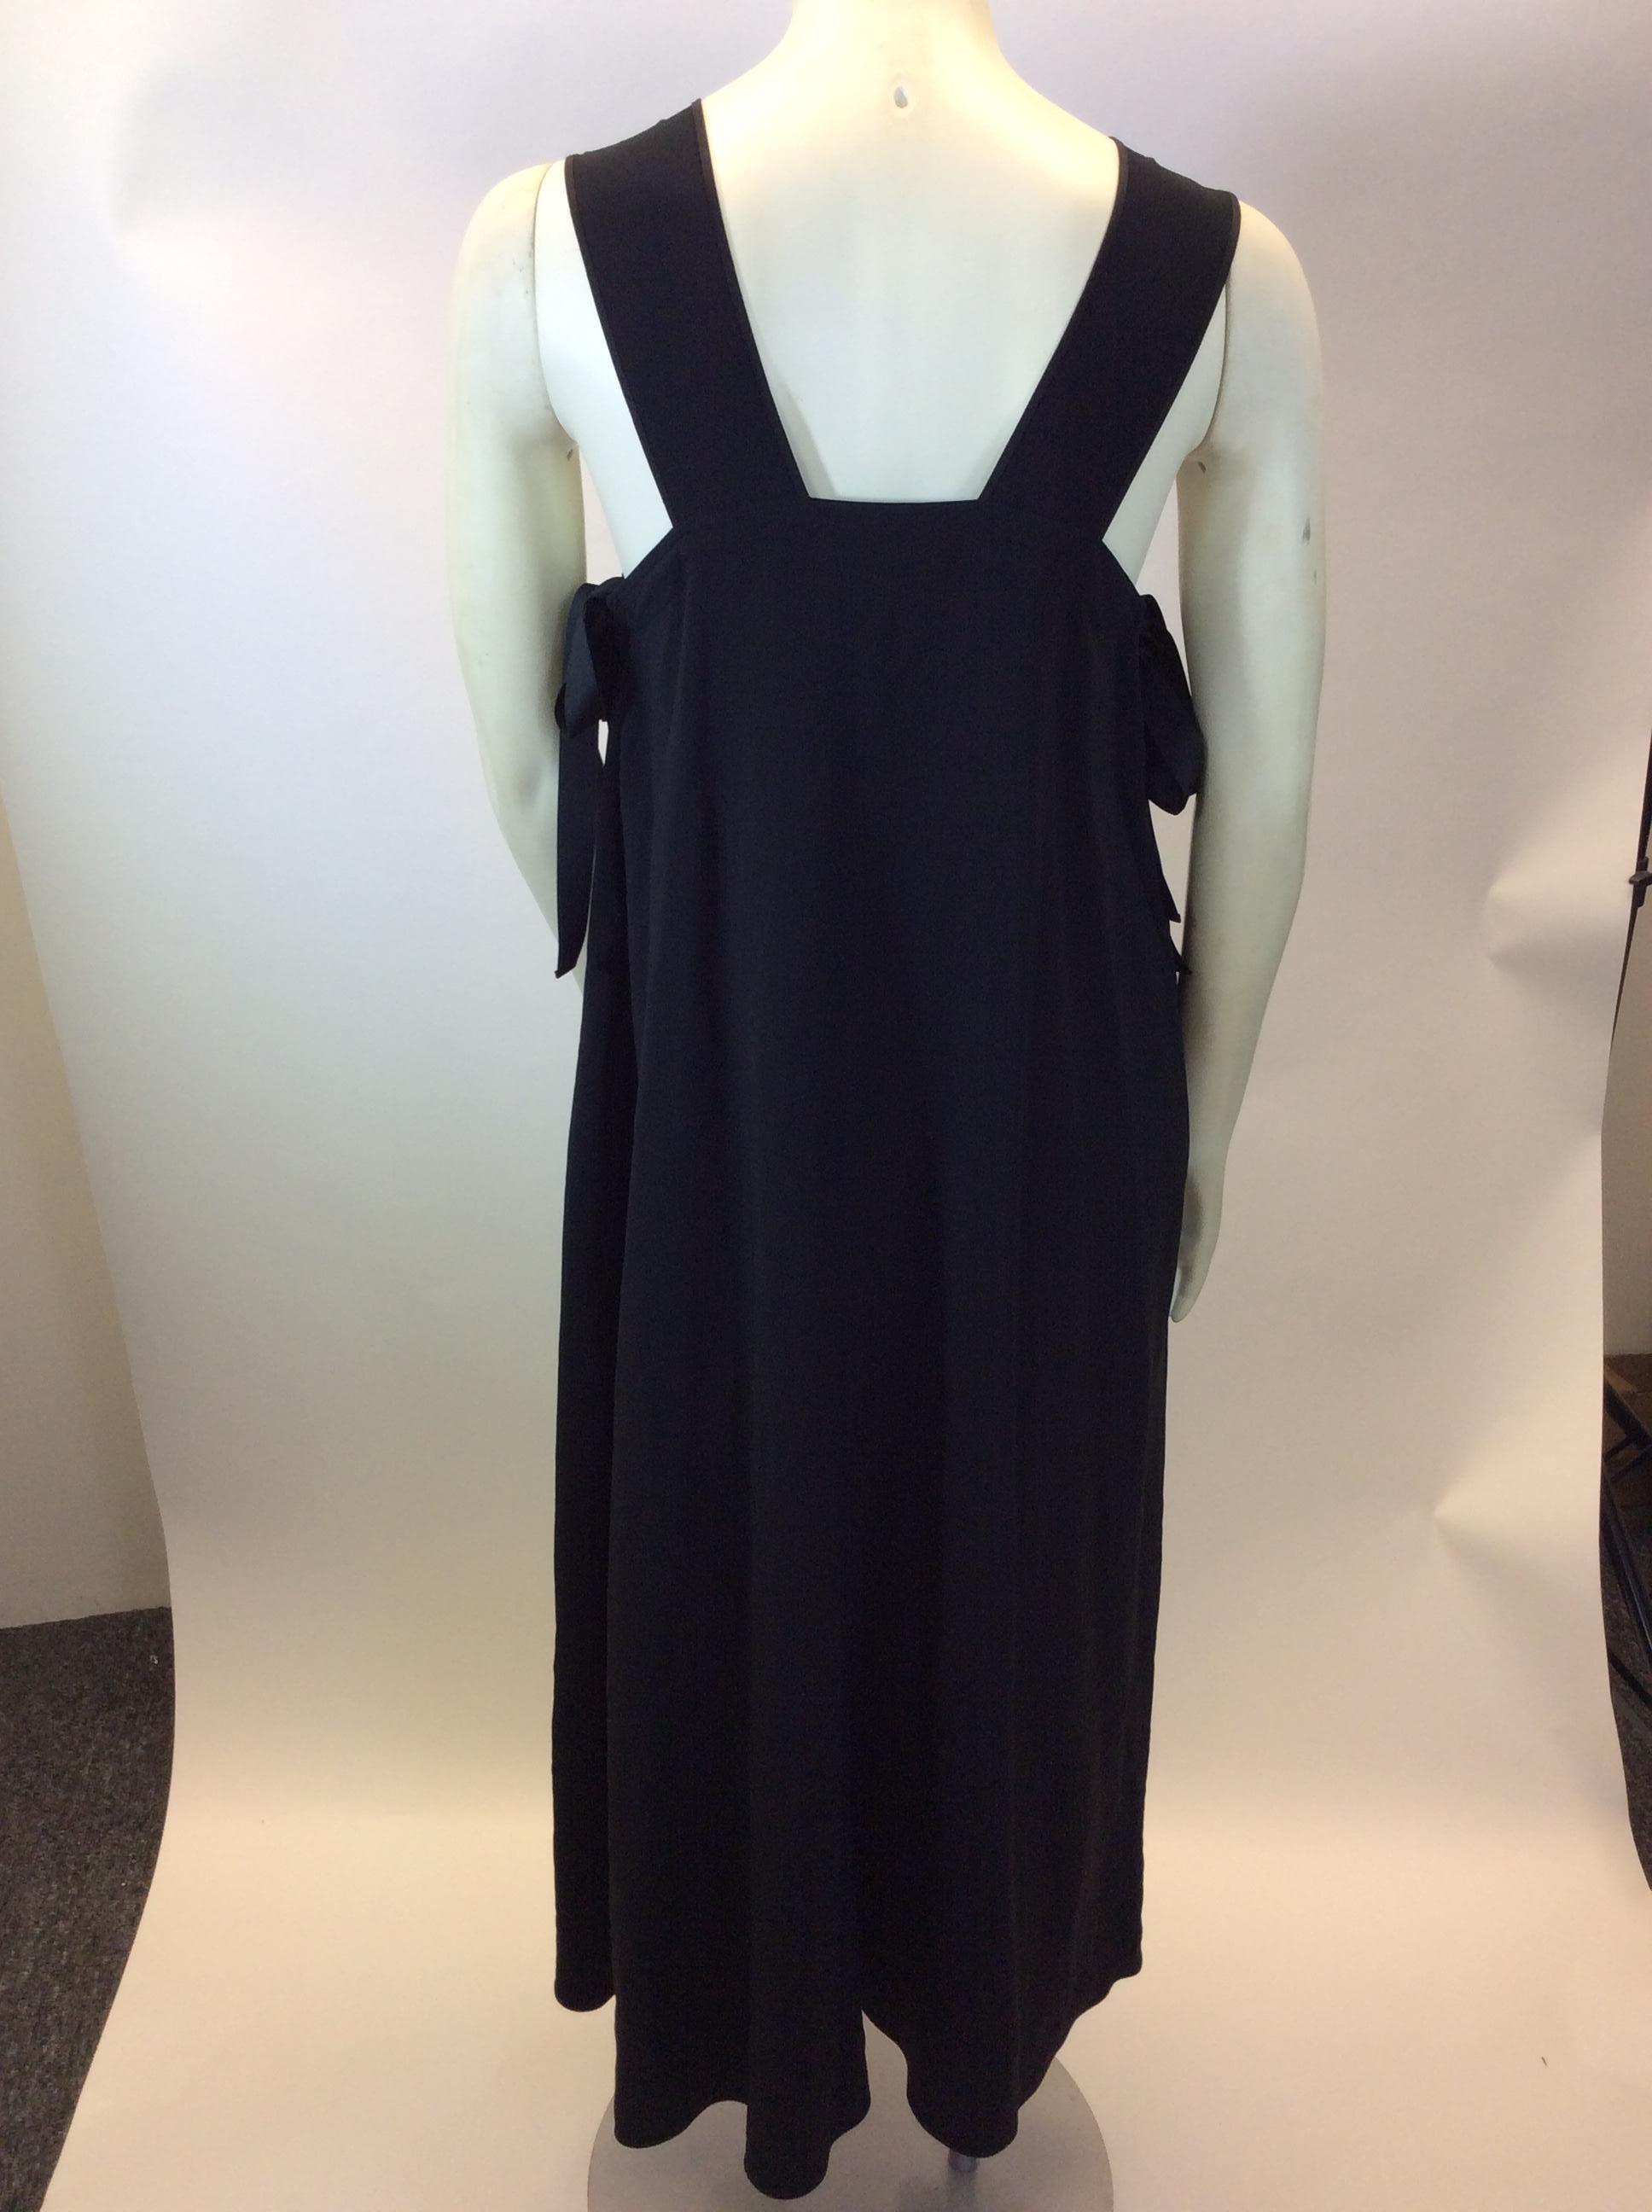 Helmut Lang Black Dress In Excellent Condition For Sale In Narberth, PA